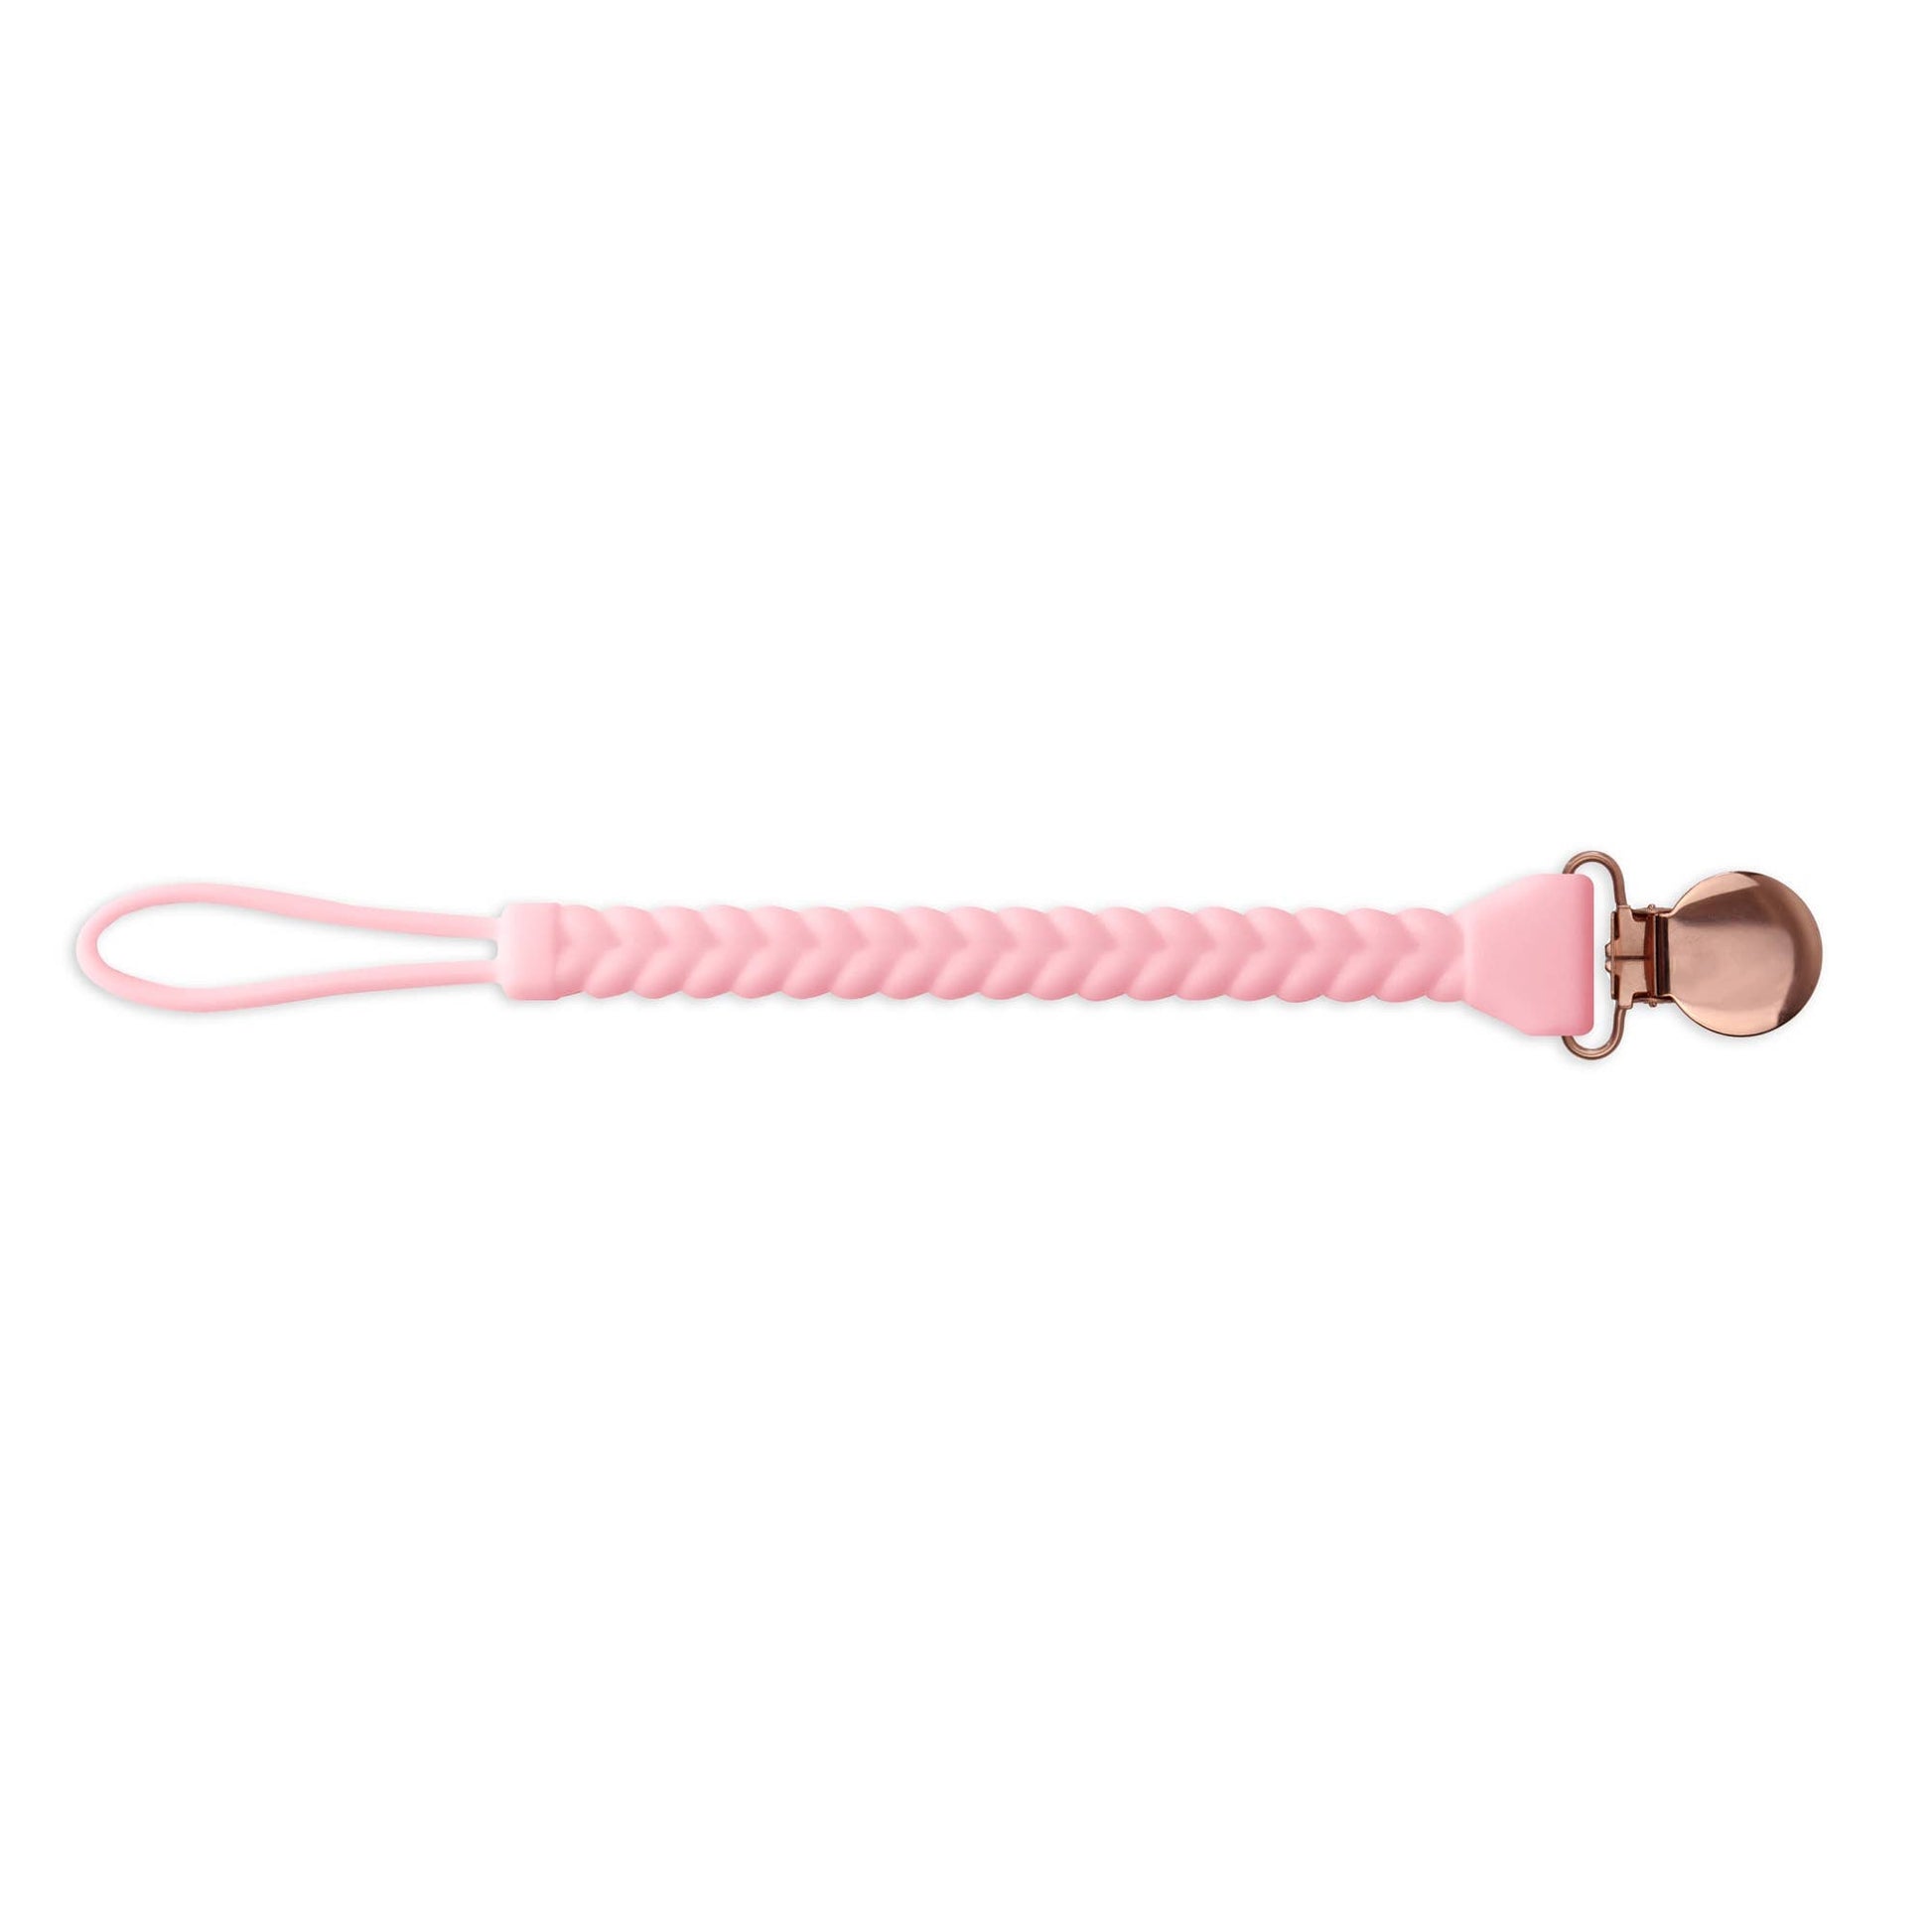 Sweetie Strap Silicone One-Piece Paci Clip - Pink Braid, Itzy Ritzy, eco-friendly Toys, Mountain Kids Toys